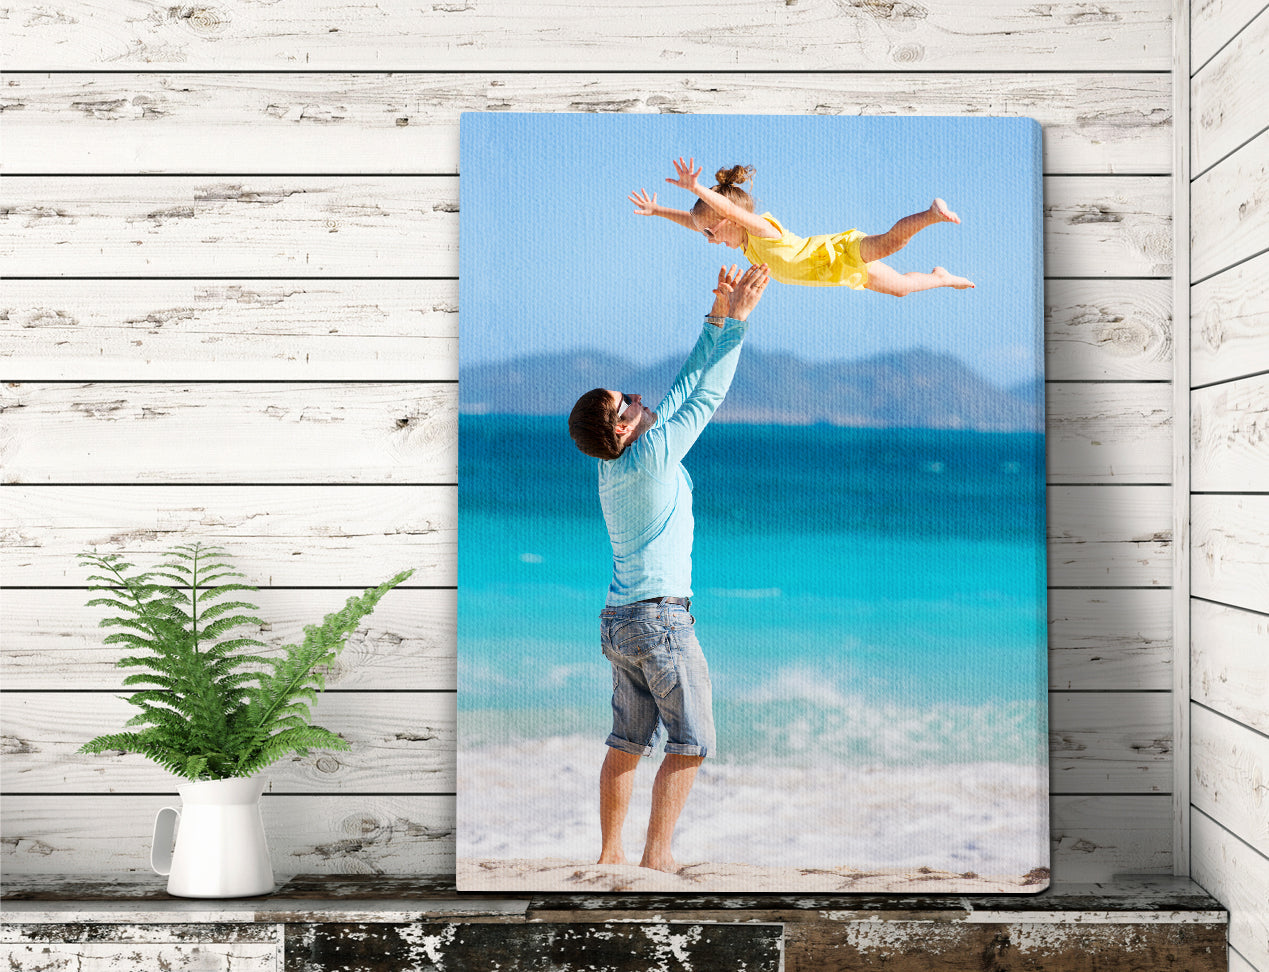 Canvas Print with family photo wrapped around edges, standing on mantlepiece